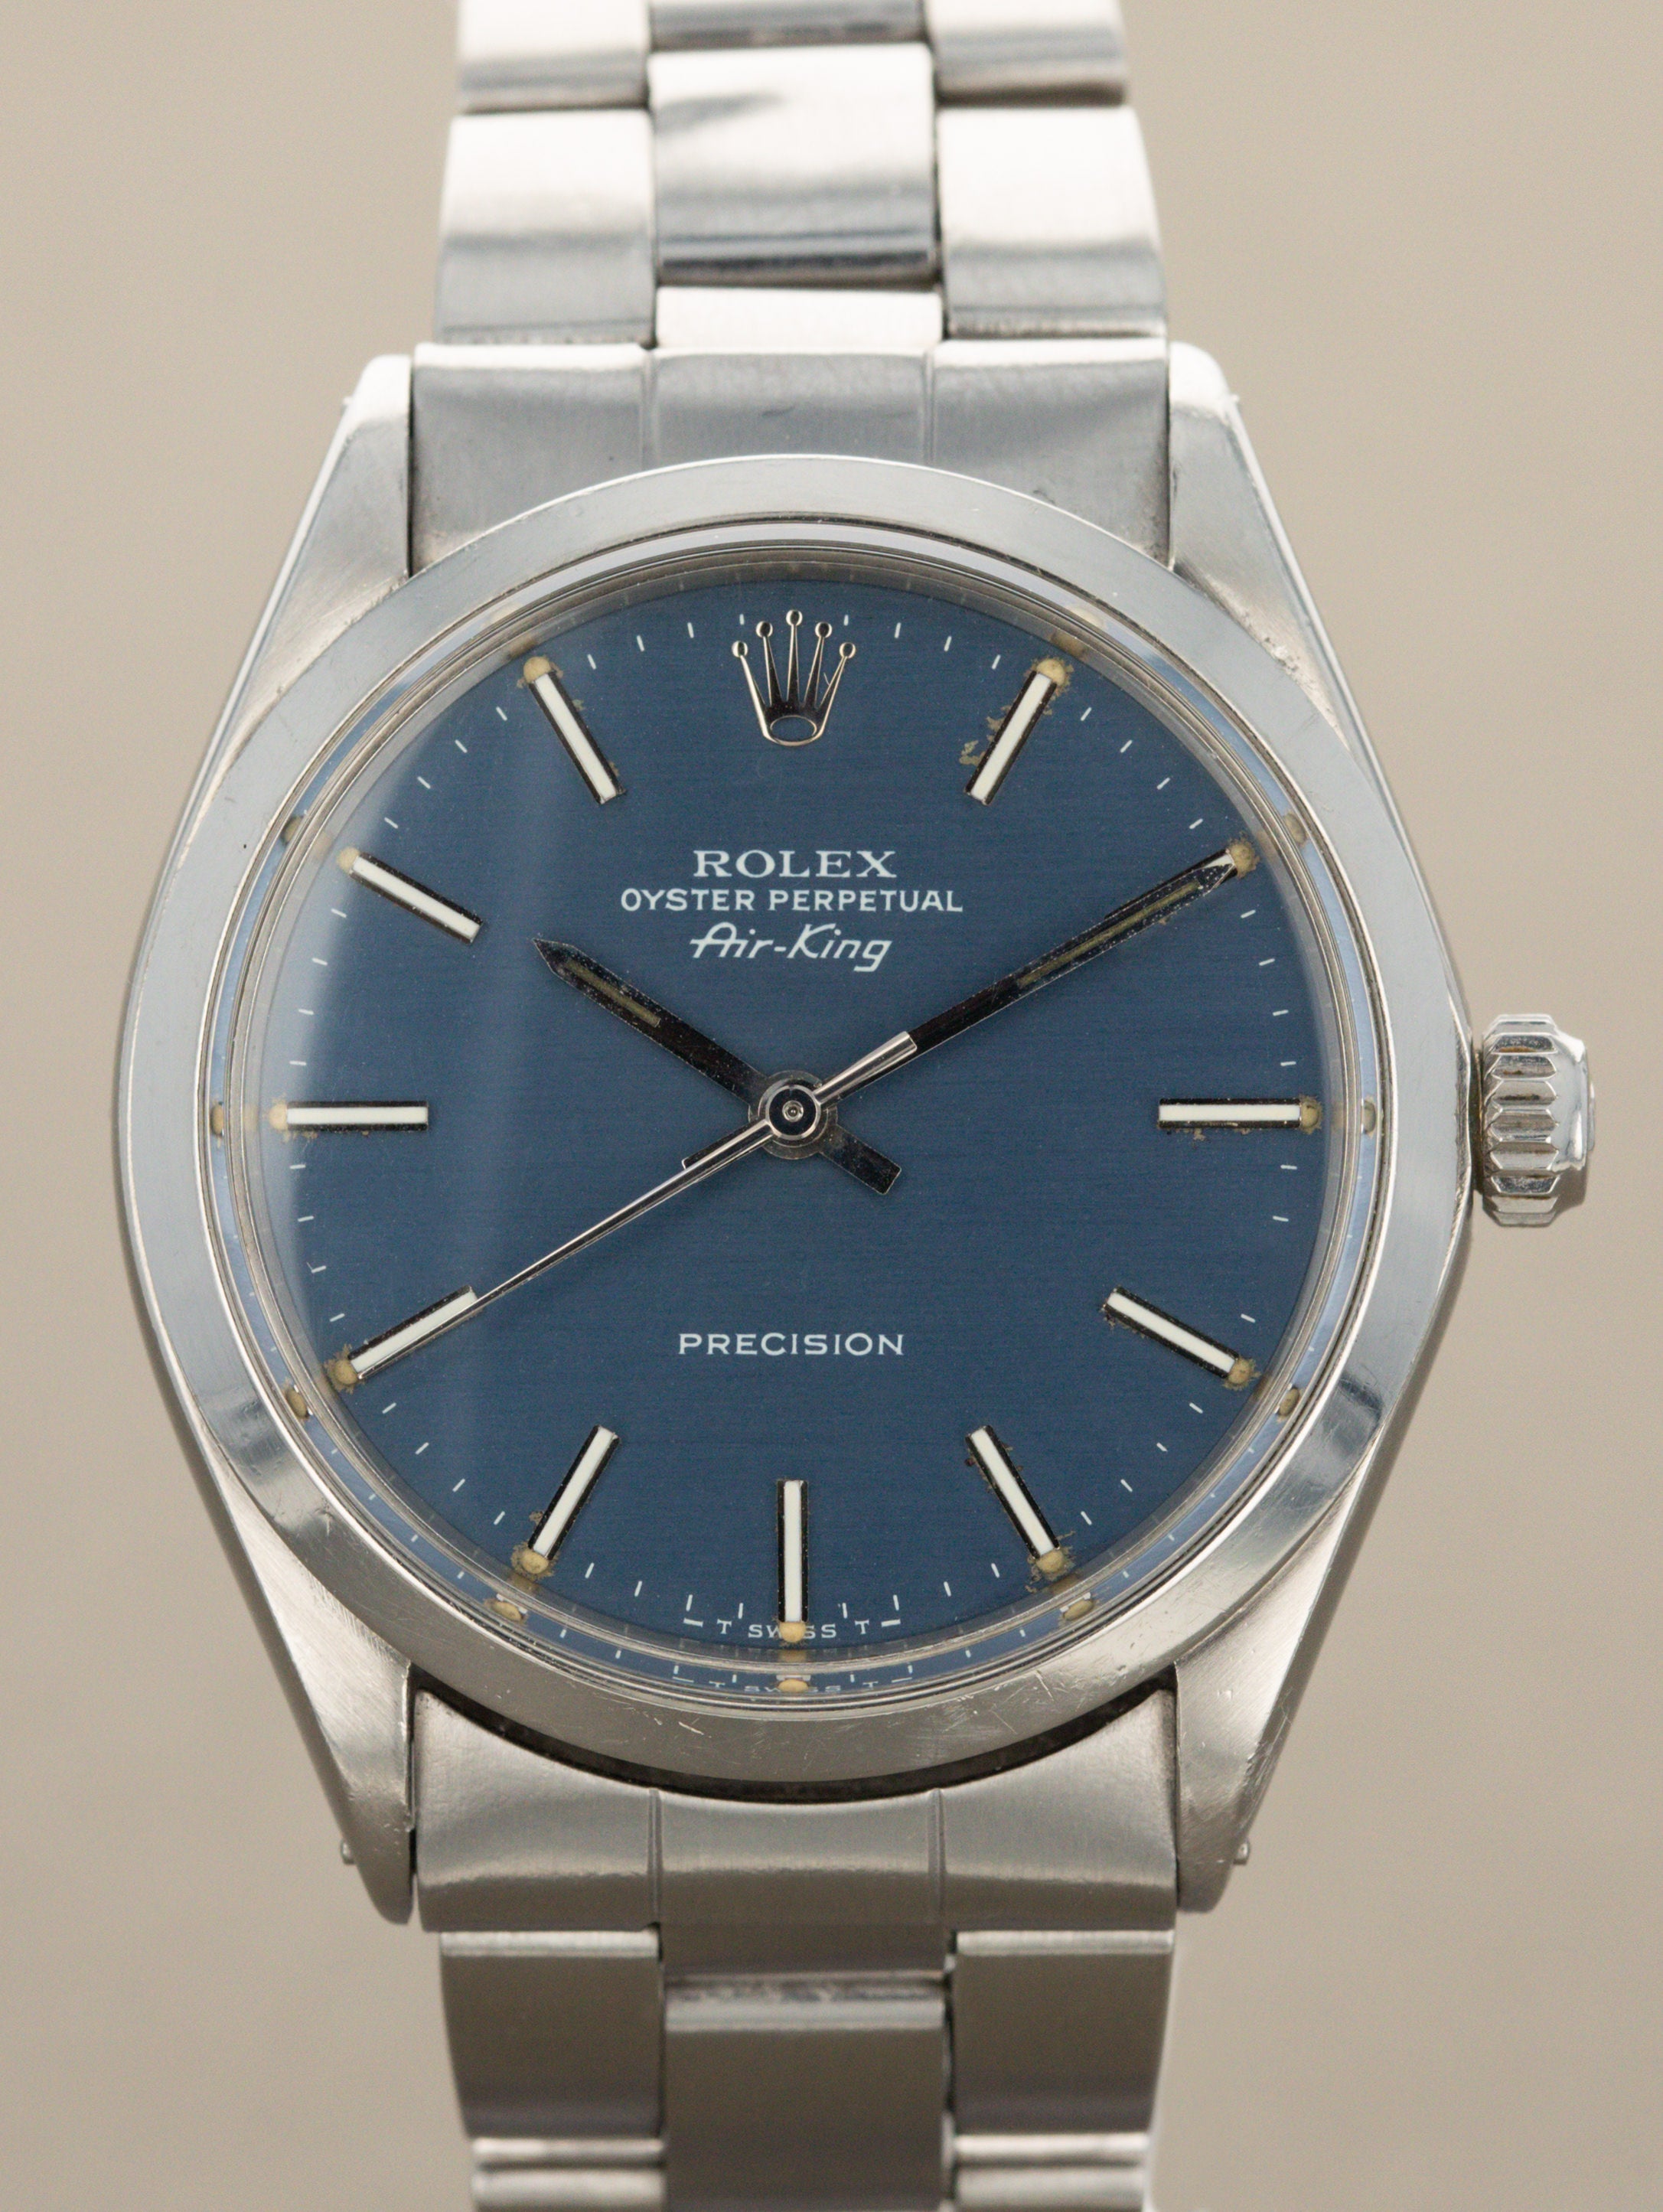 Rolex Air-King Ref. 5500 - 'Brushed' Blue Dial